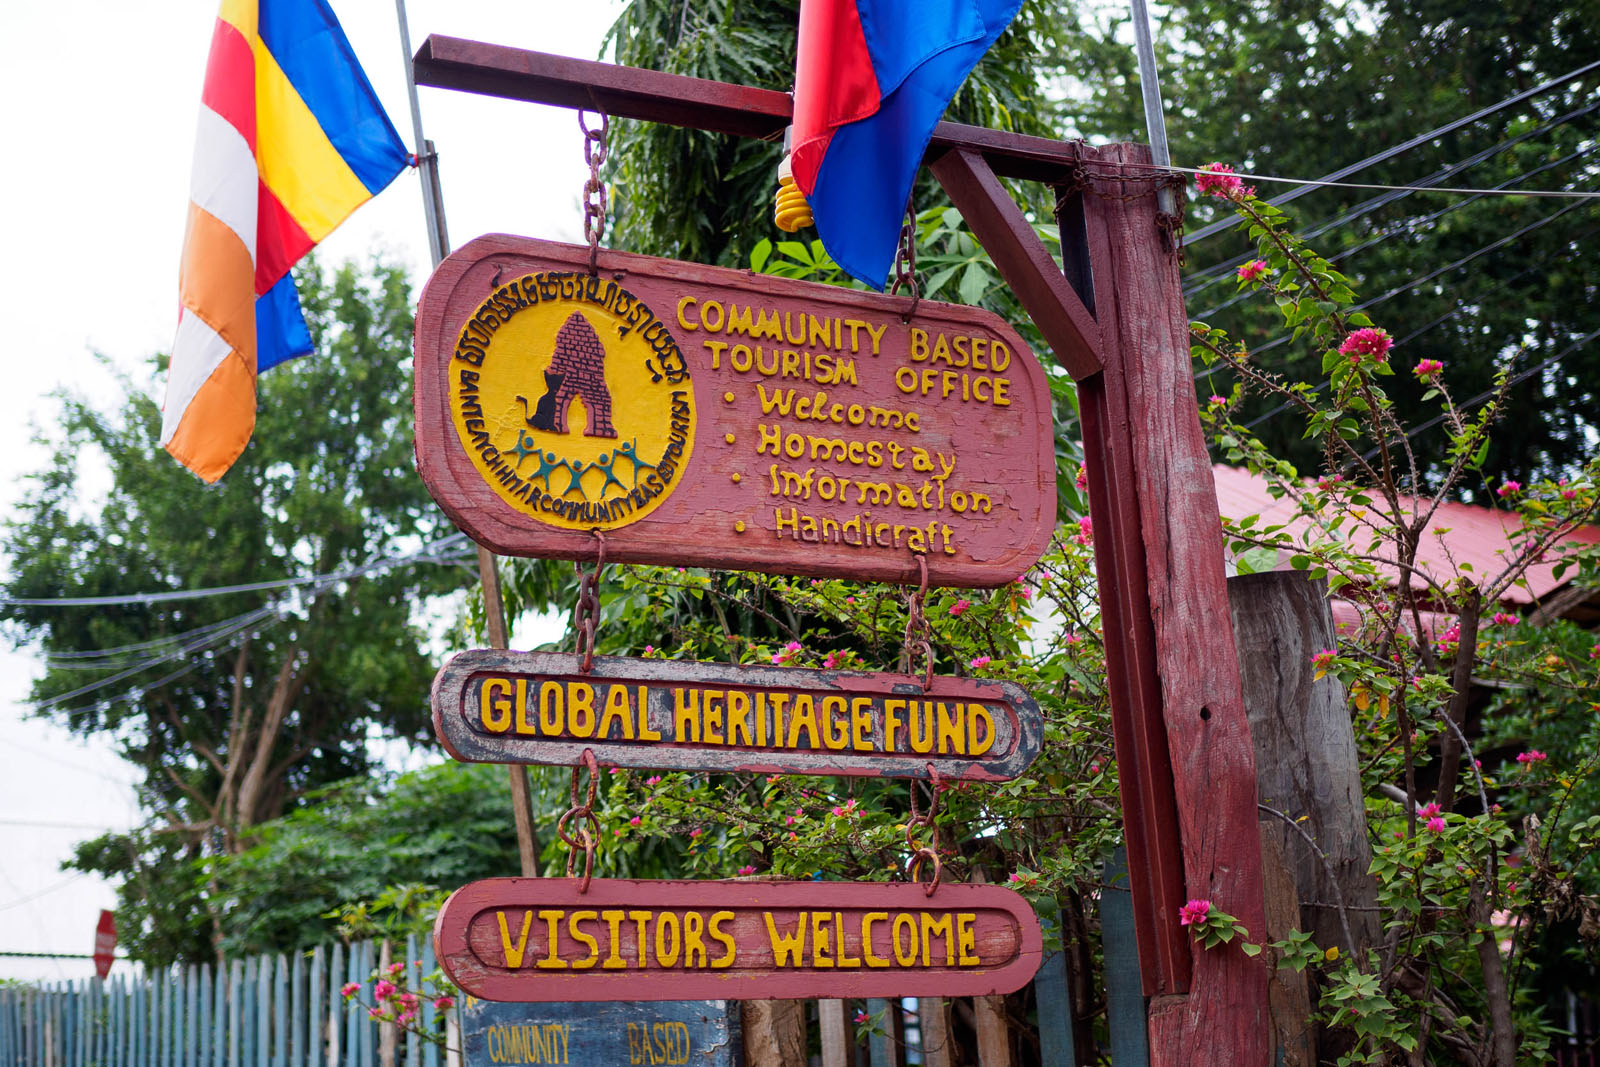 A sign welcomes guests to the Banteay Chhmar CBT office. Photo by Emily Lush